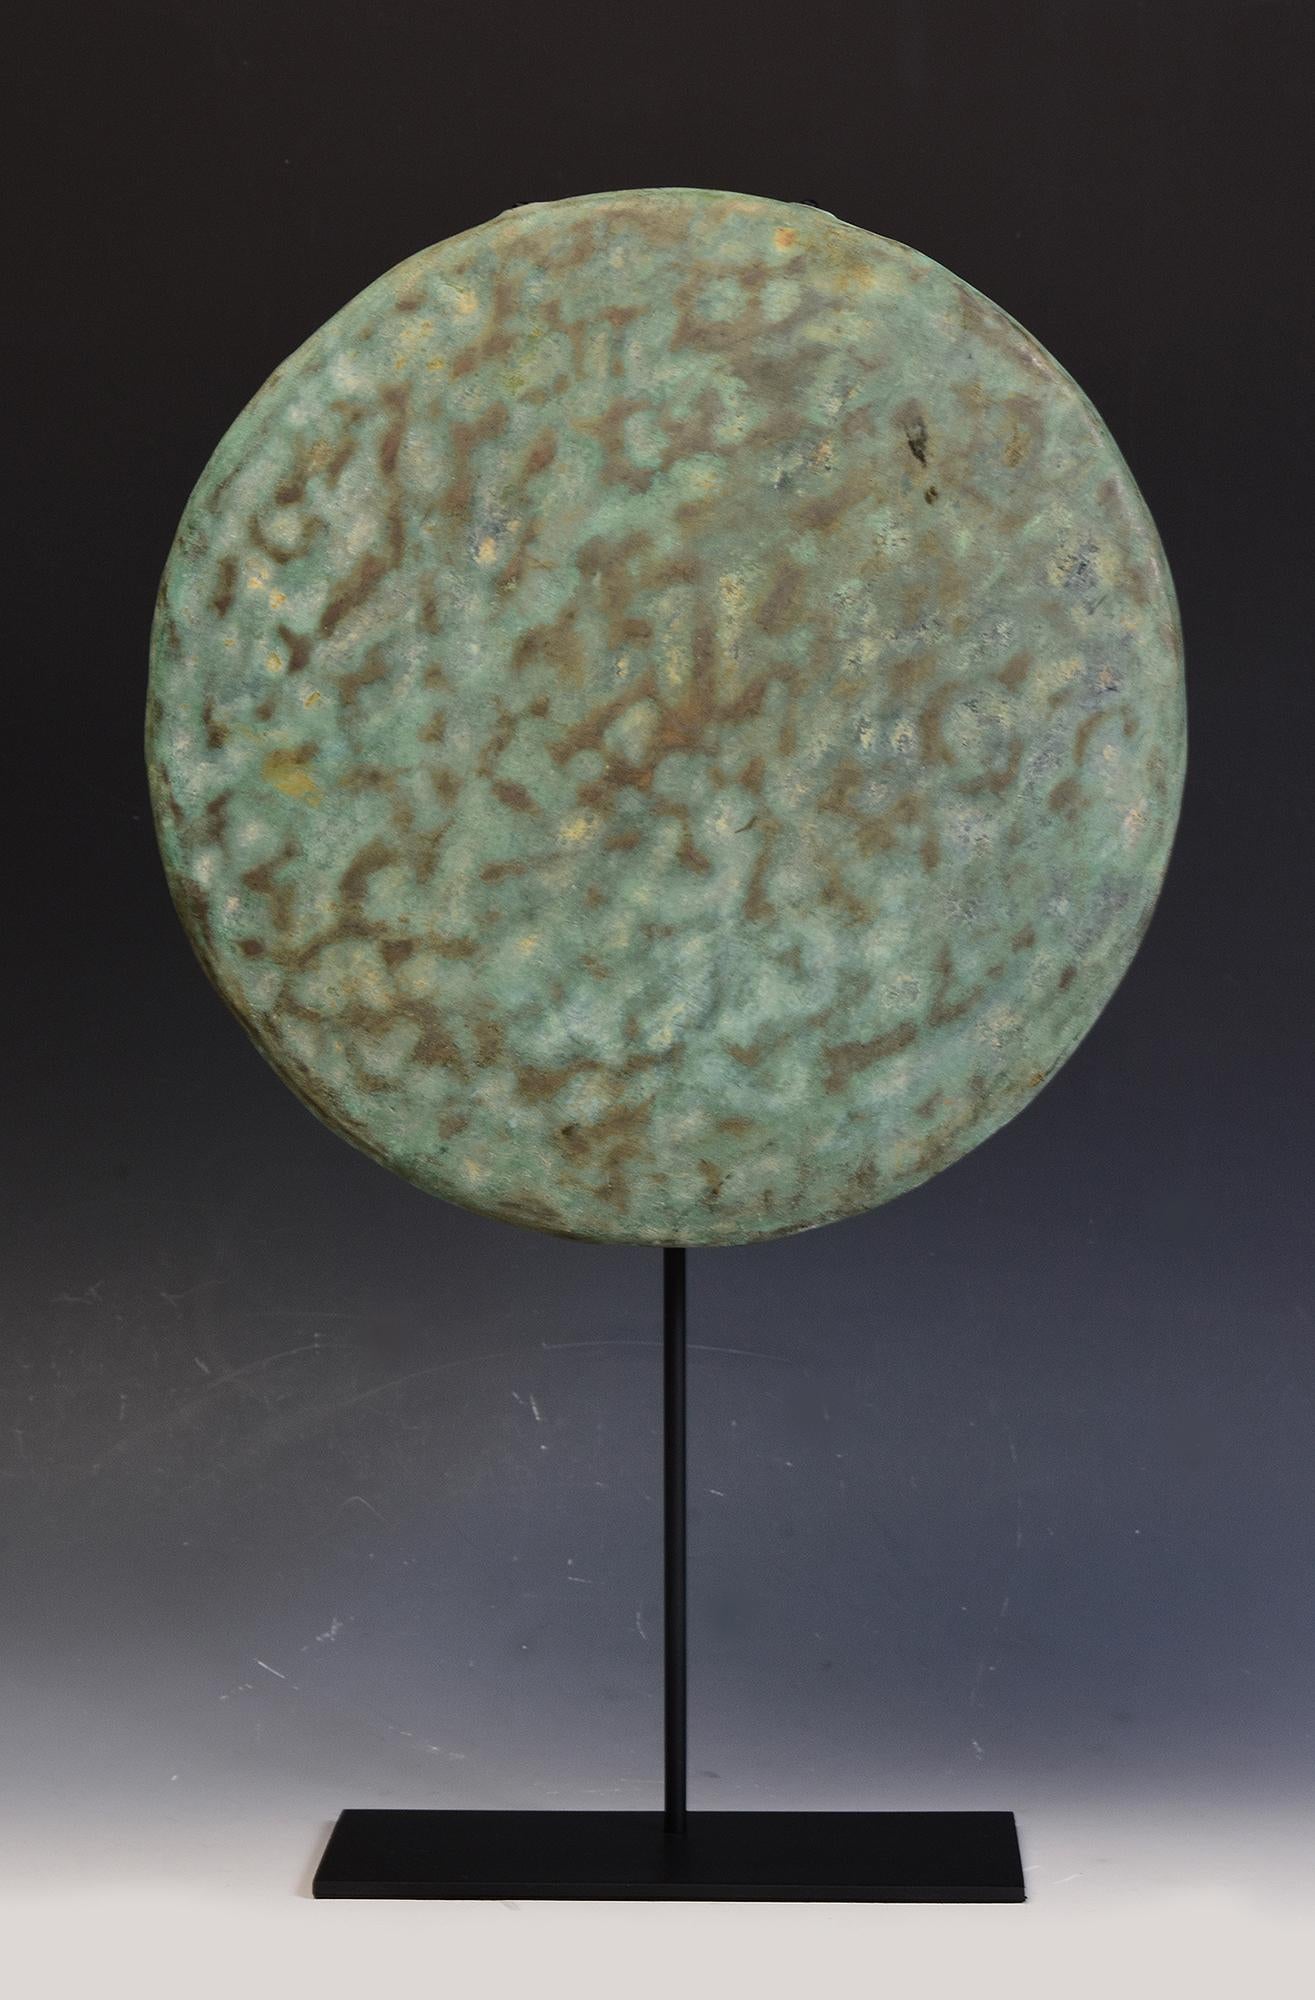 Antique Khmer bronze gong with nice green patina with stand.

Age: Cambodia, Angkor Vat Period, 12th Century
Size of gong only: Diameter 29.5 C.M. / Thickness 5 C.M.
Size including stand: Height 48 C.M.
Condition: Nice condition overall (some